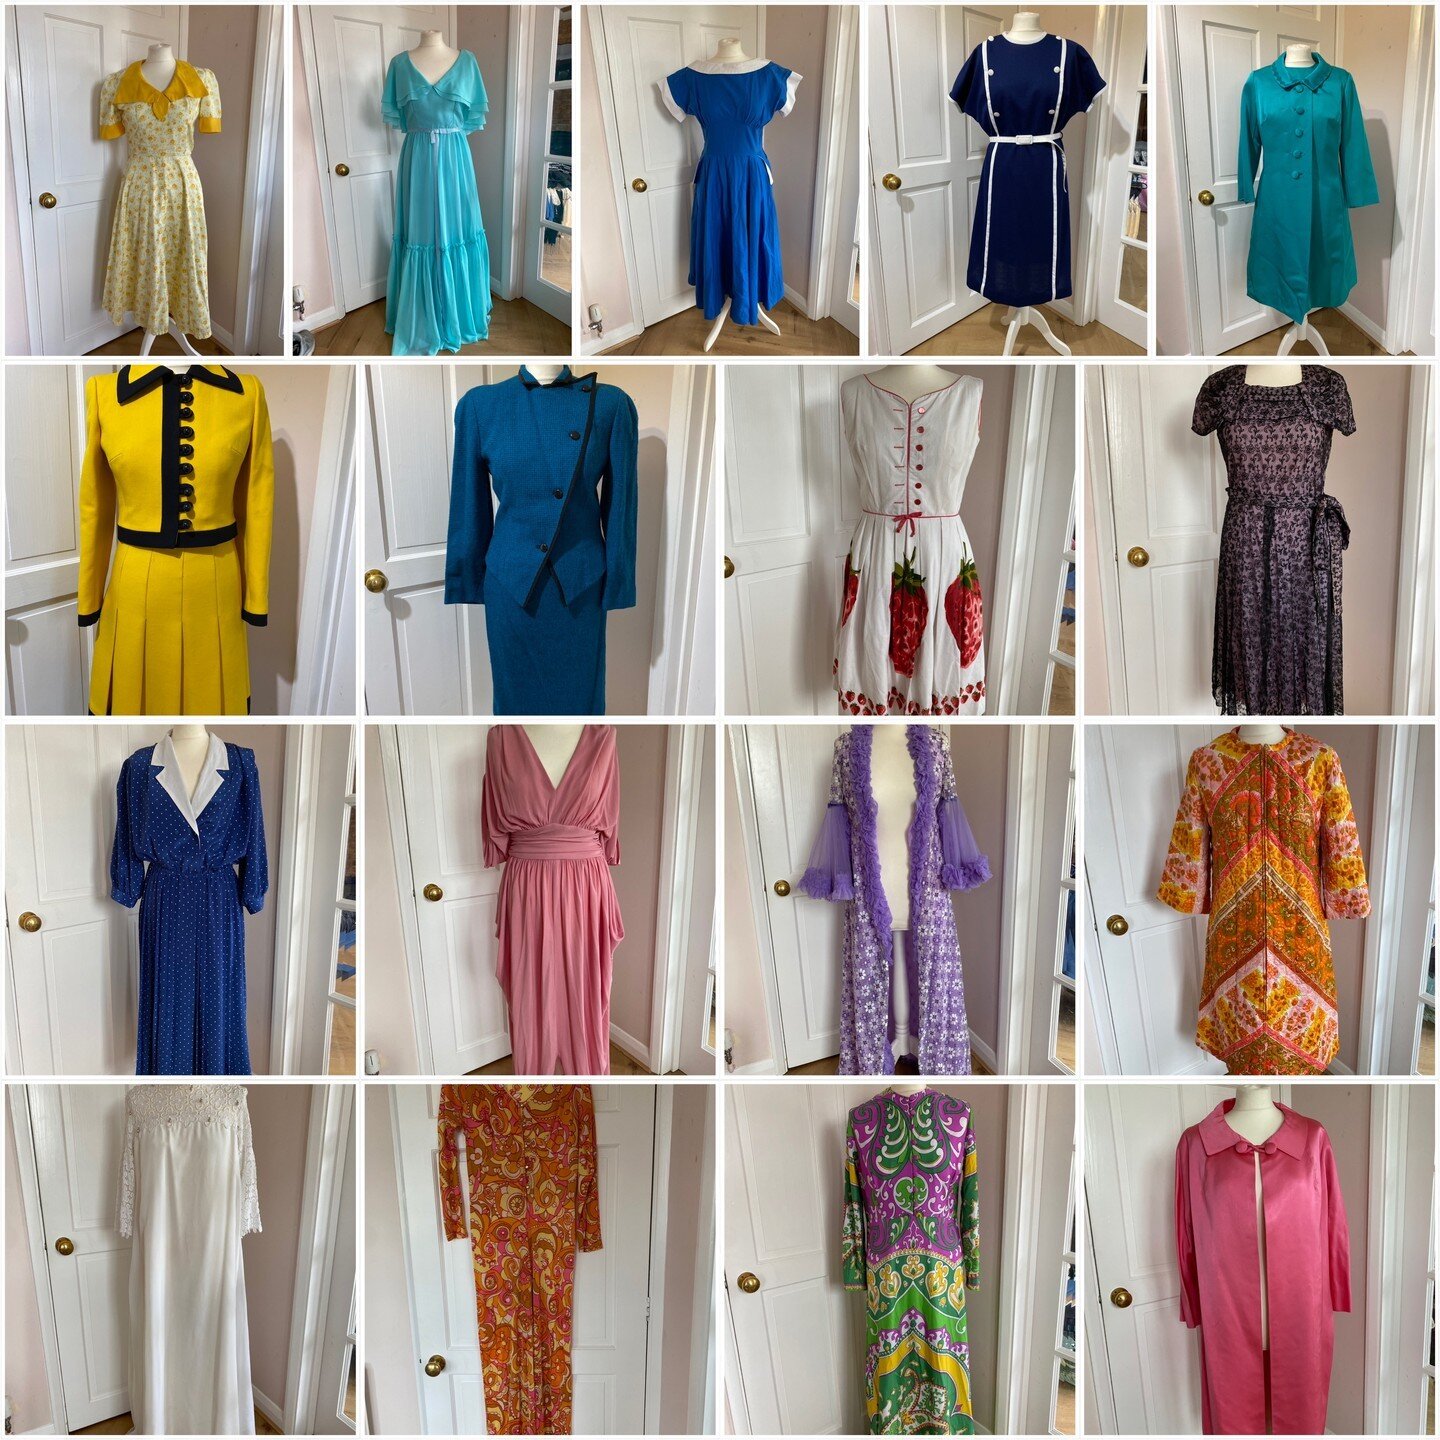 Refresh your wardrobe with some vintage style.

Lot of new stock, original pieces from the 1950s, 60s and 70s, and more to come.

#vintagefashion #vintagestyle #vintageclothing #retroclothing #vintageshop #1950s #1960s #1960s #newstock